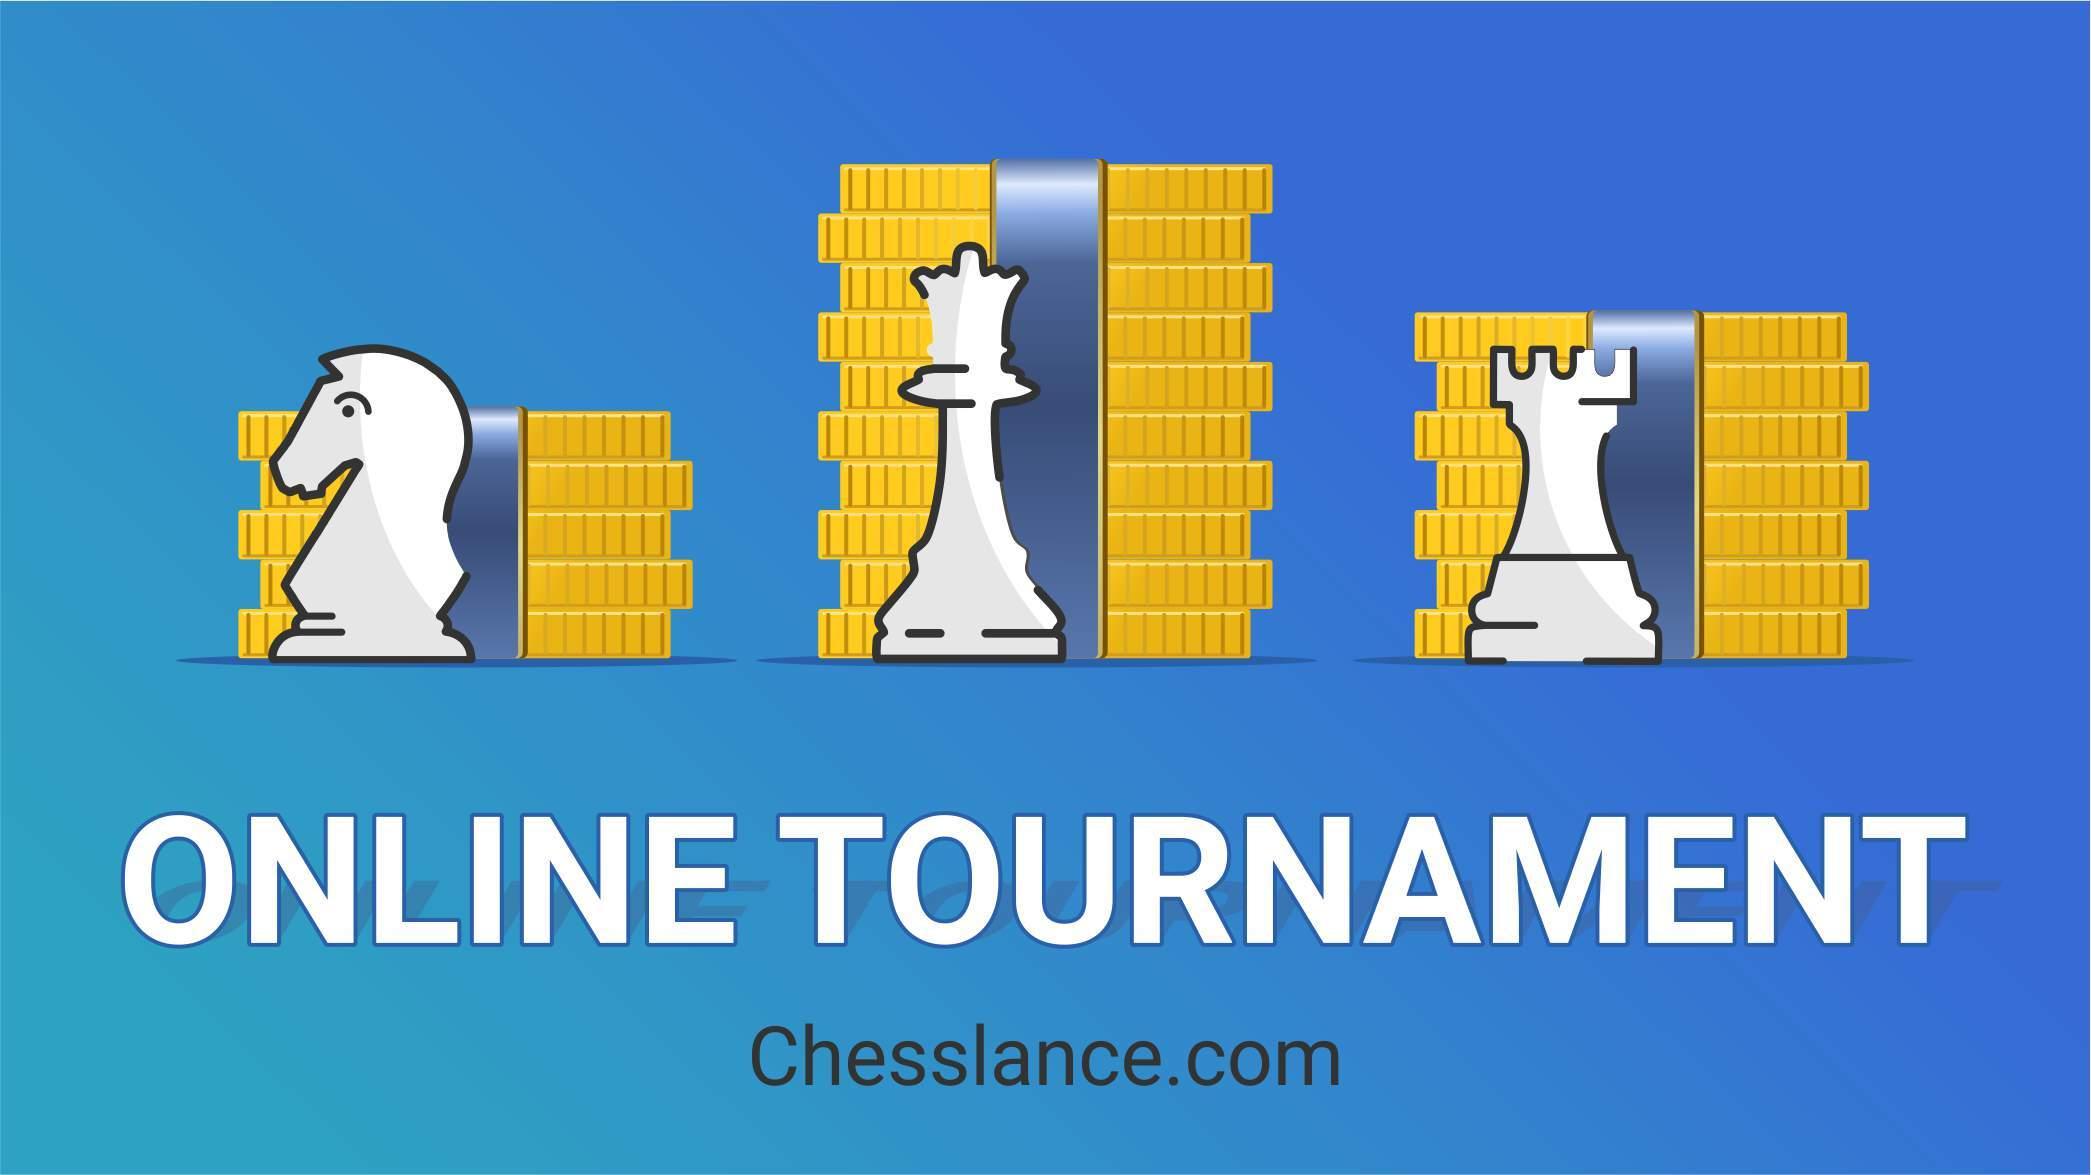 play online chess and earn earn real cash money